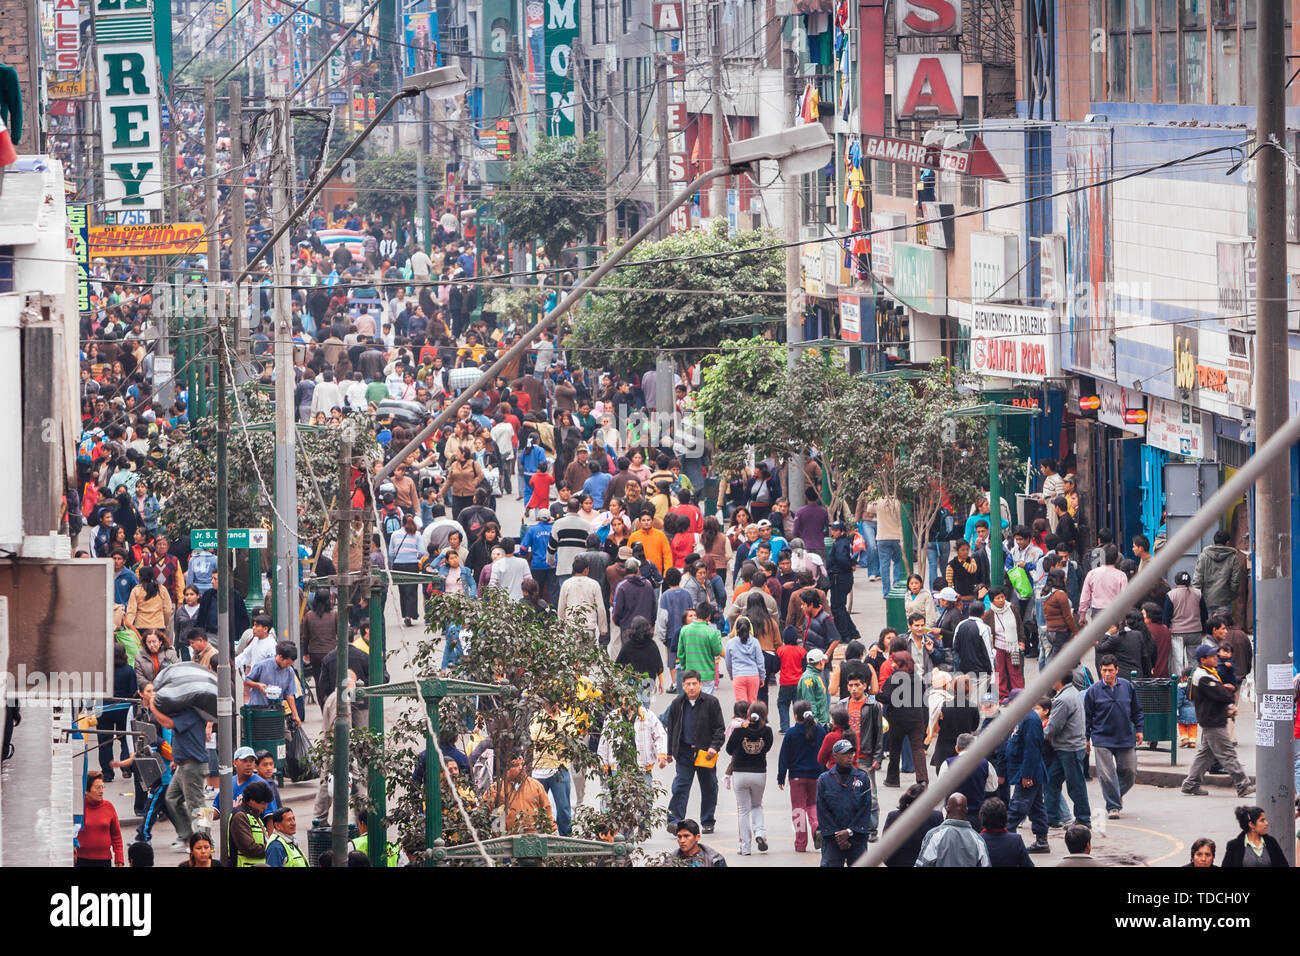 Lima / Peru Jun 13.2008: Crowd of people on the street of the biggest garment district called Gamarra. Stock Photo